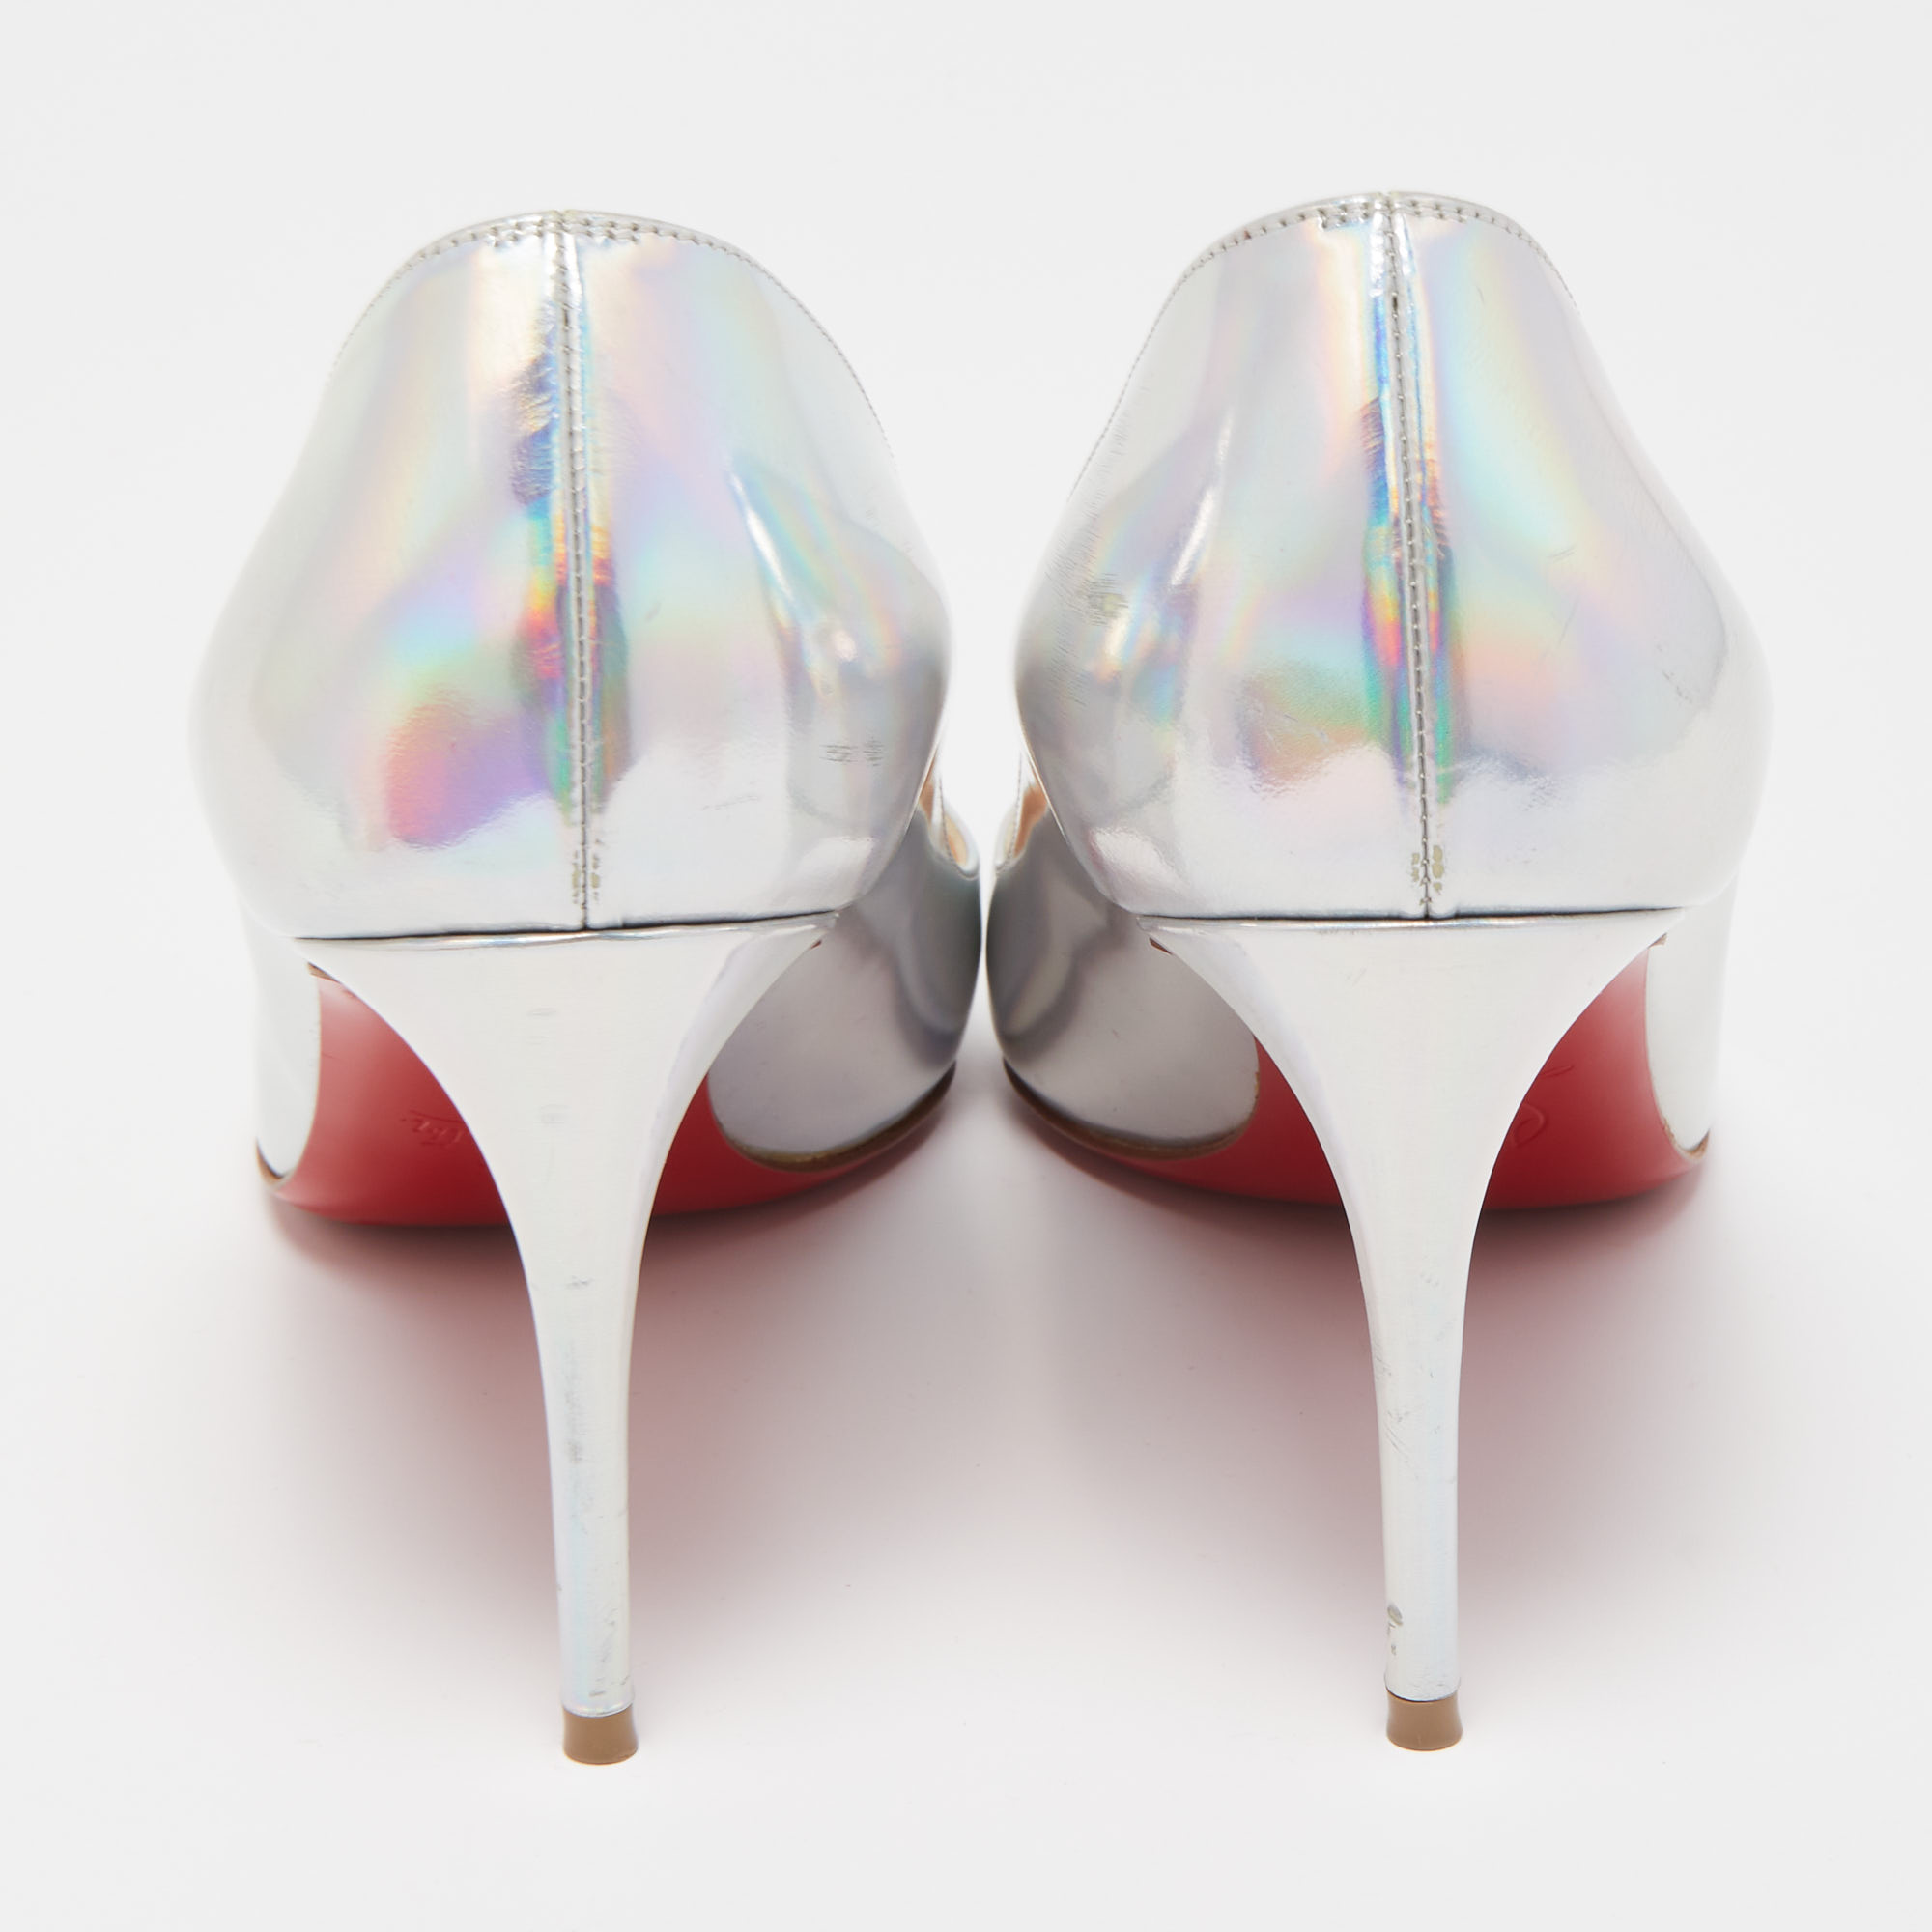 Christian Louboutin Silver Patent Pigalle Pumps Size 38